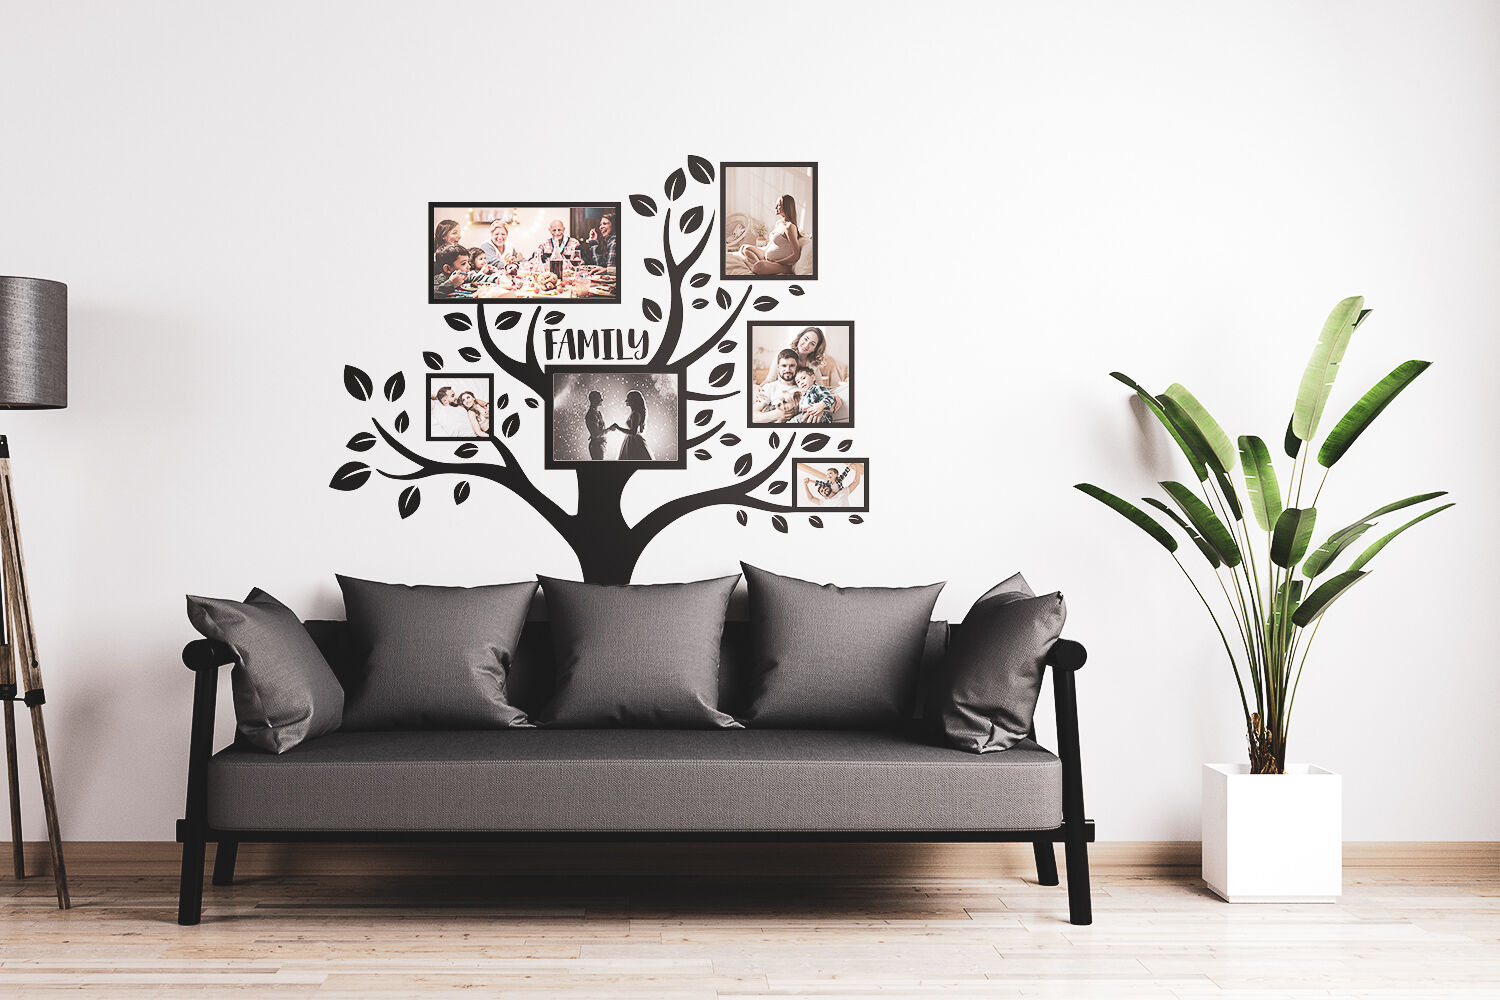 Download Family Collage Svg Bundle Family Wall Decal Svg By Sharpsvg Thehungryjpeg Com